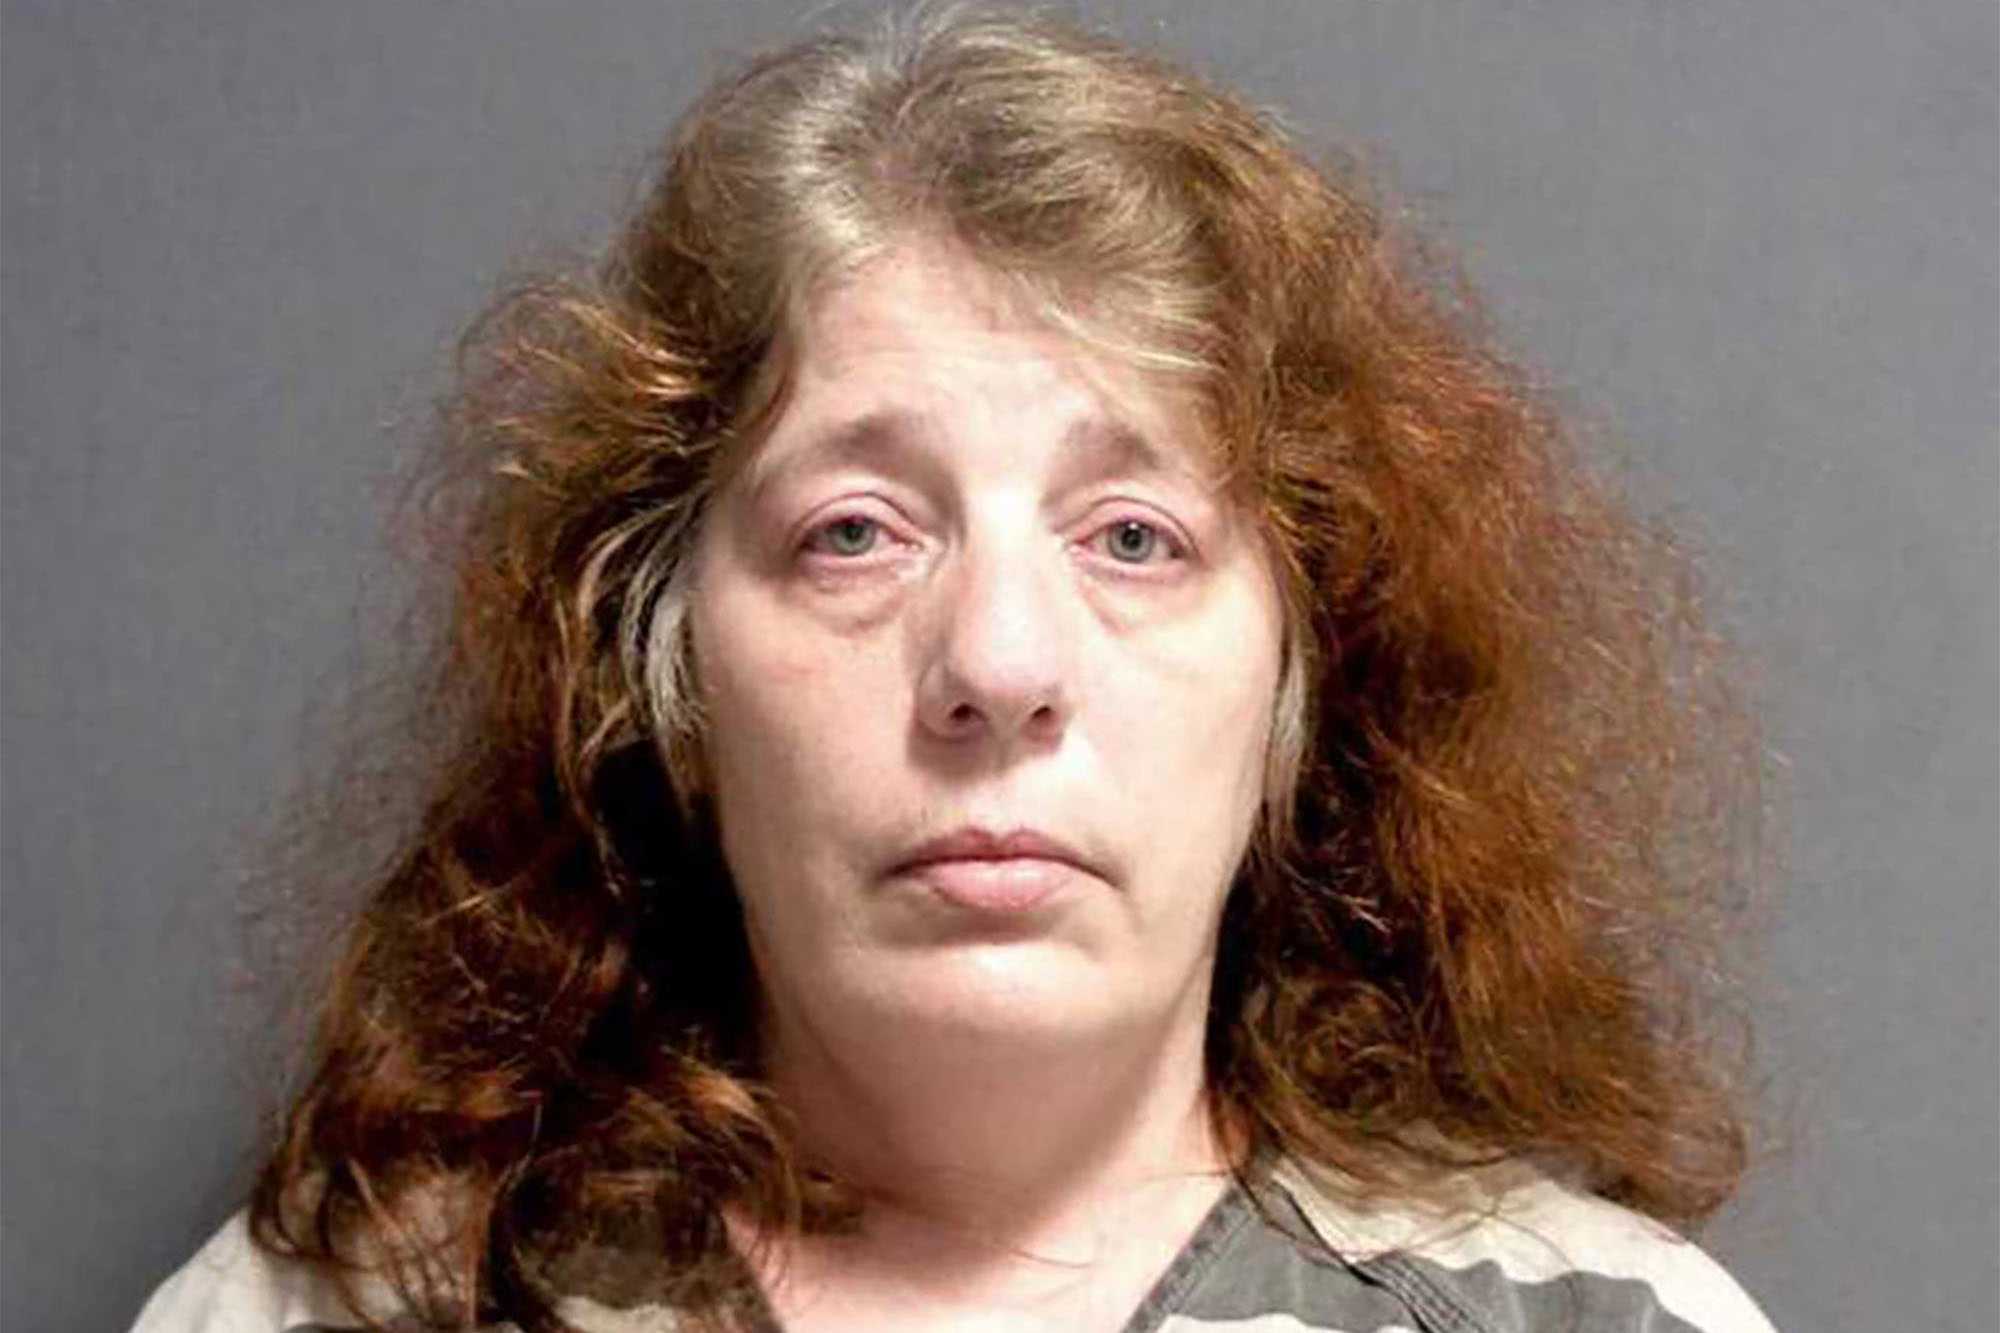 A Michigan woman faces prison after trying to hire an assassin through a fake website